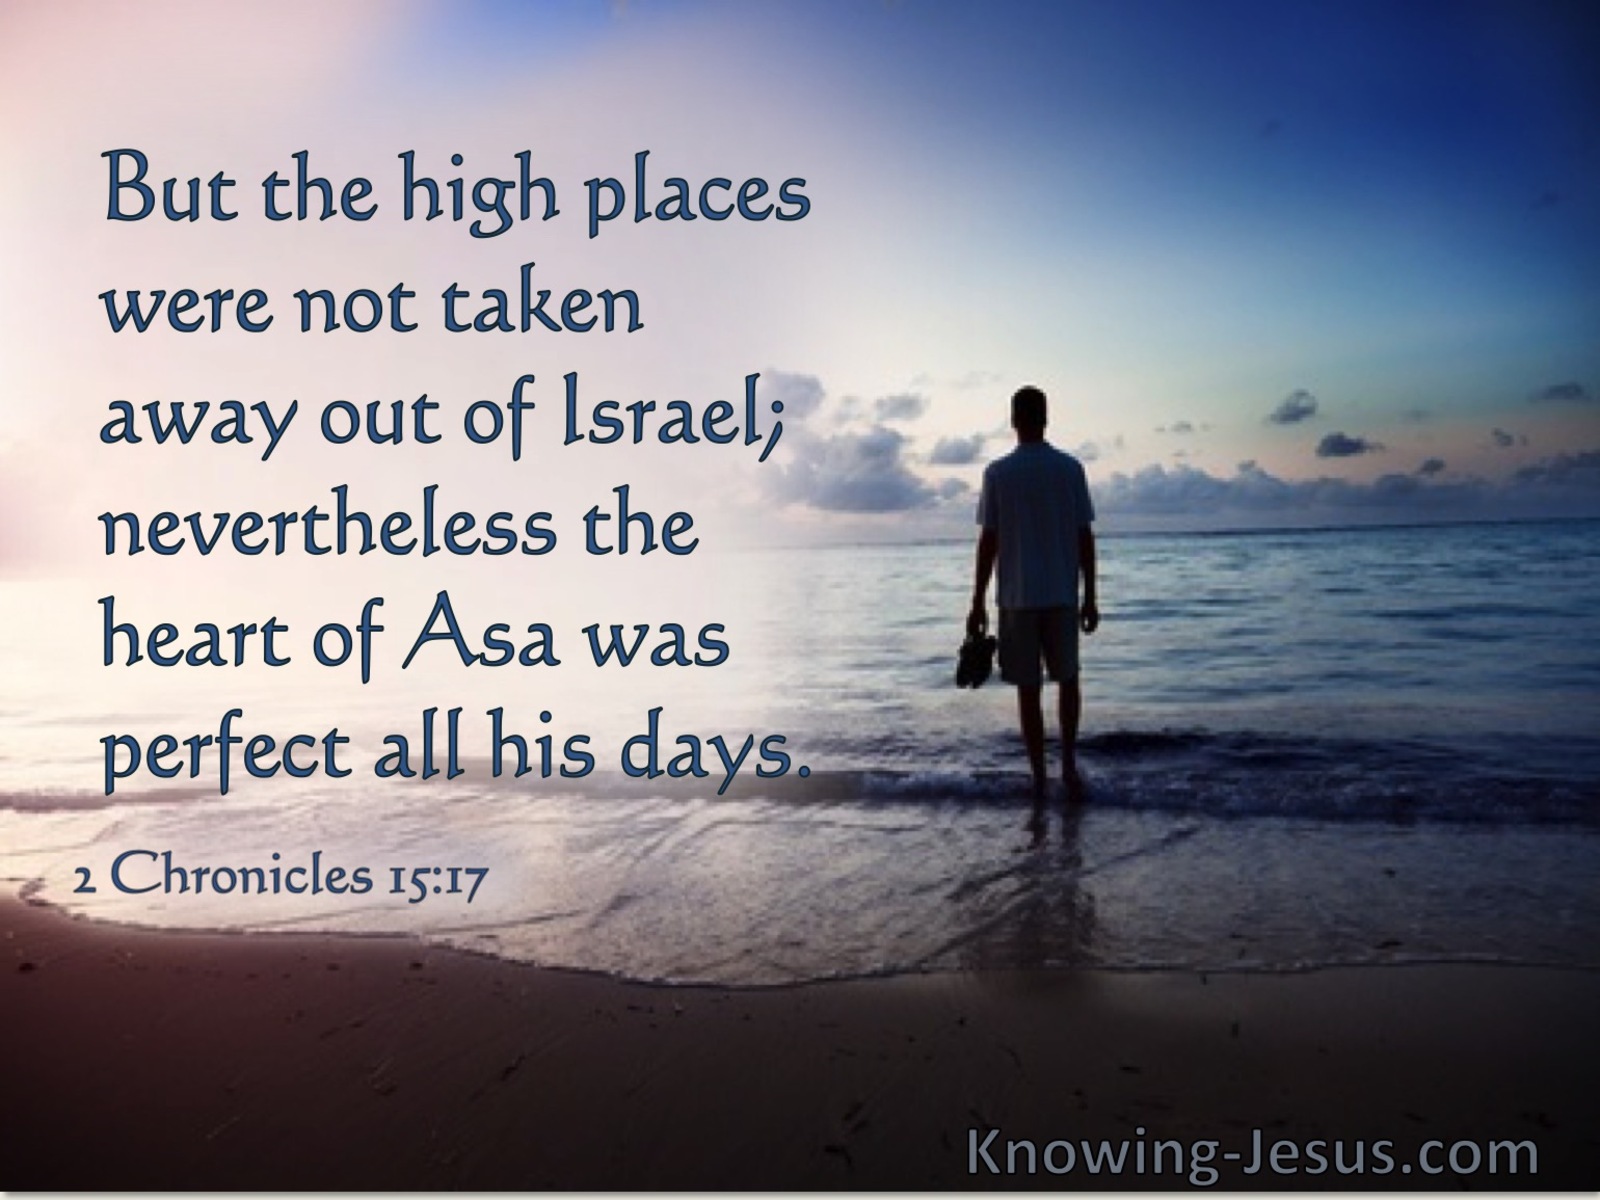 2 Chronicles 15:17 Nevertheless The Heart Of Asa Was Perfect All His Days (utmost)04:15